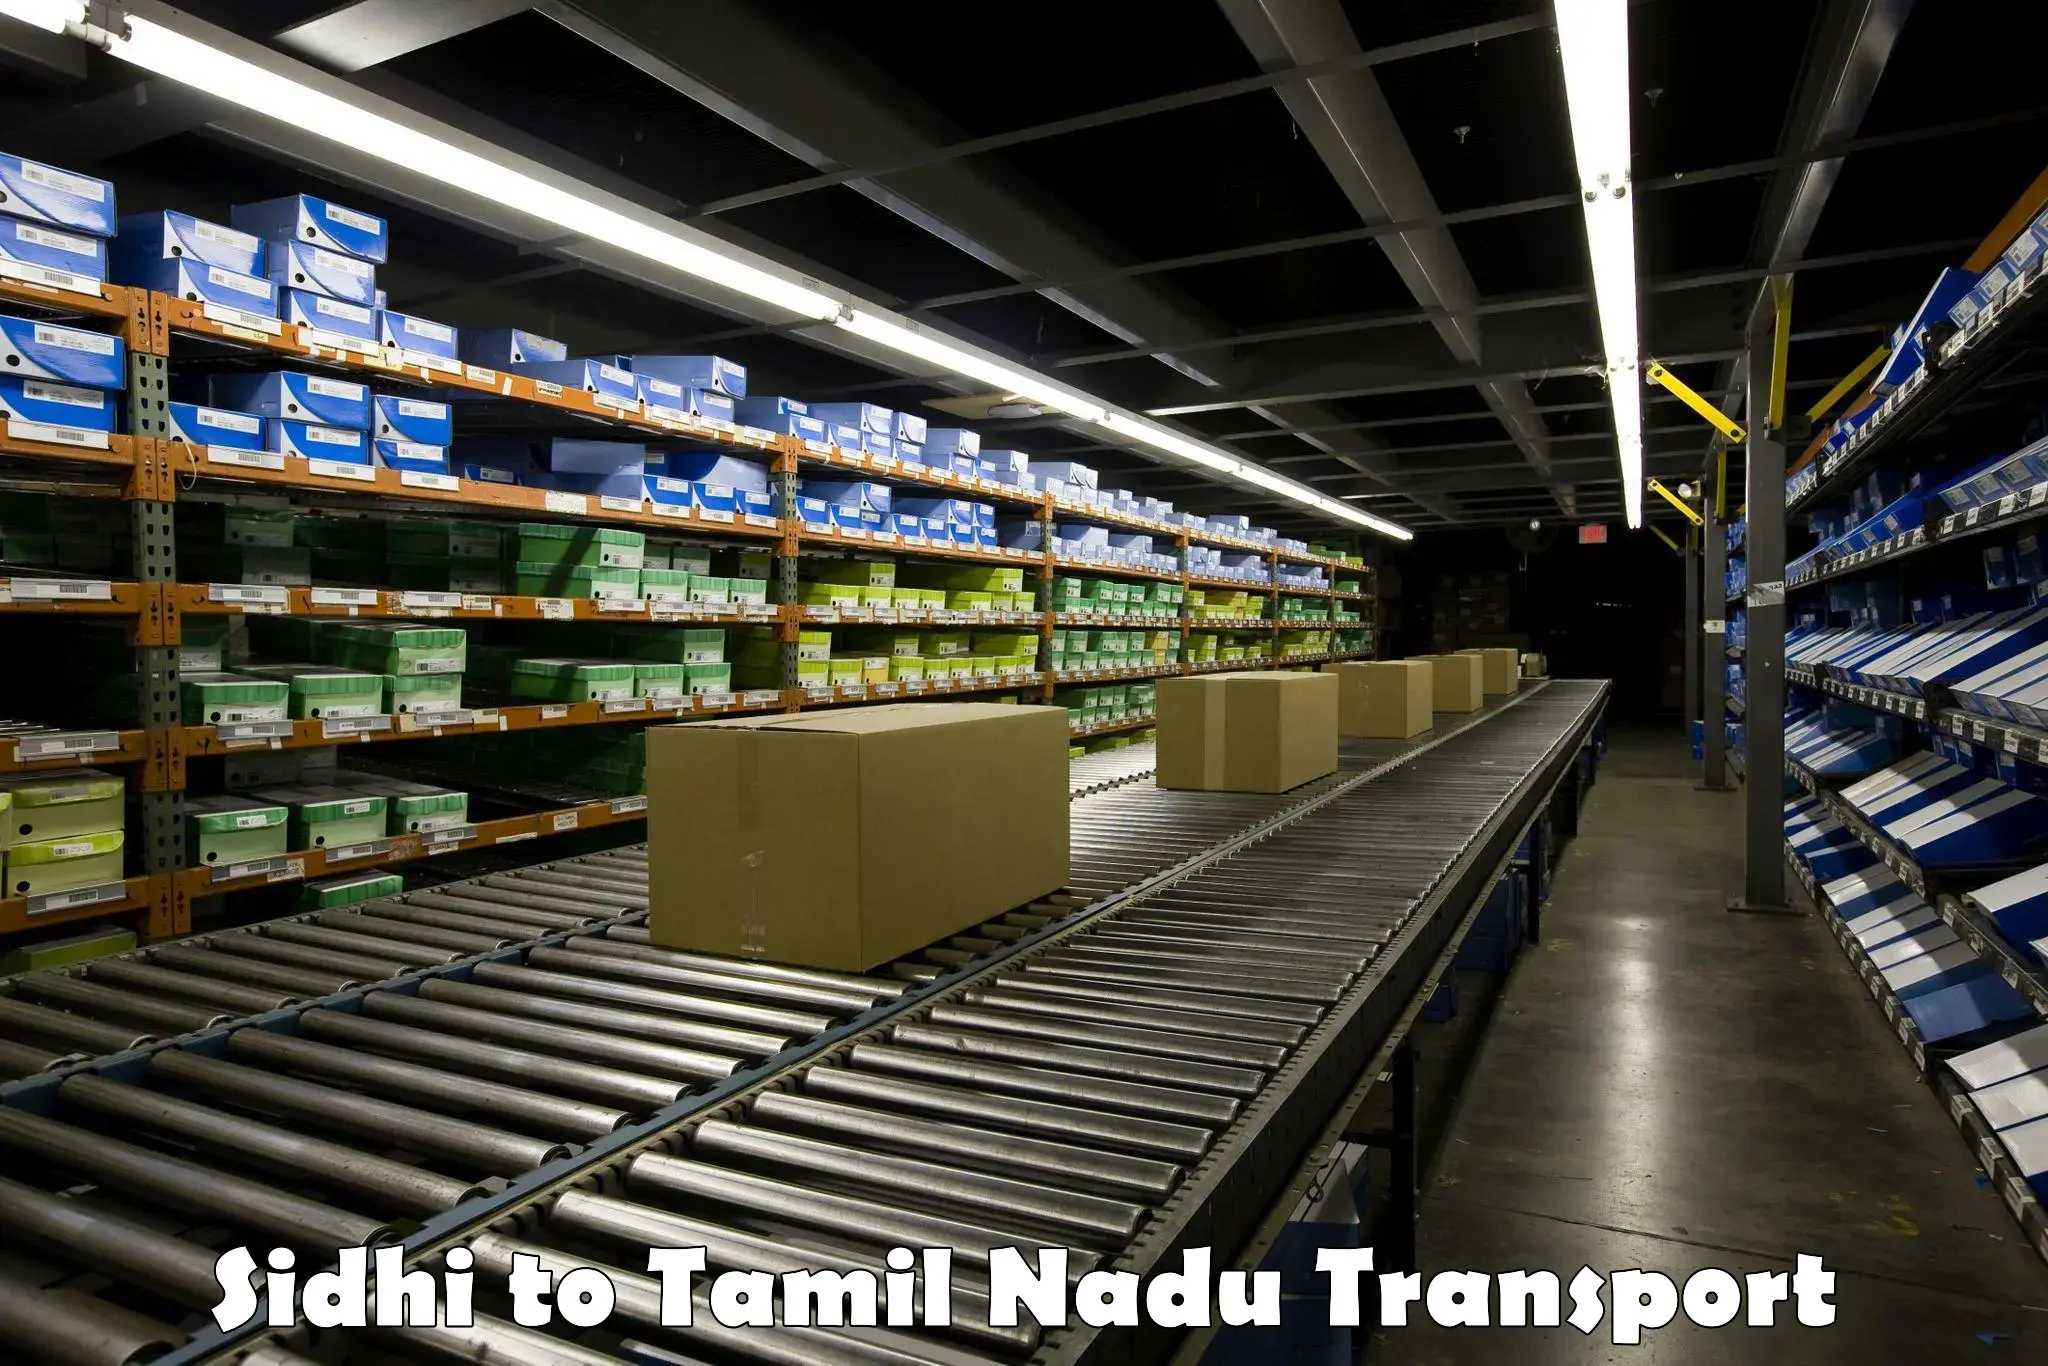 Container transport service Sidhi to Tamil Nadu